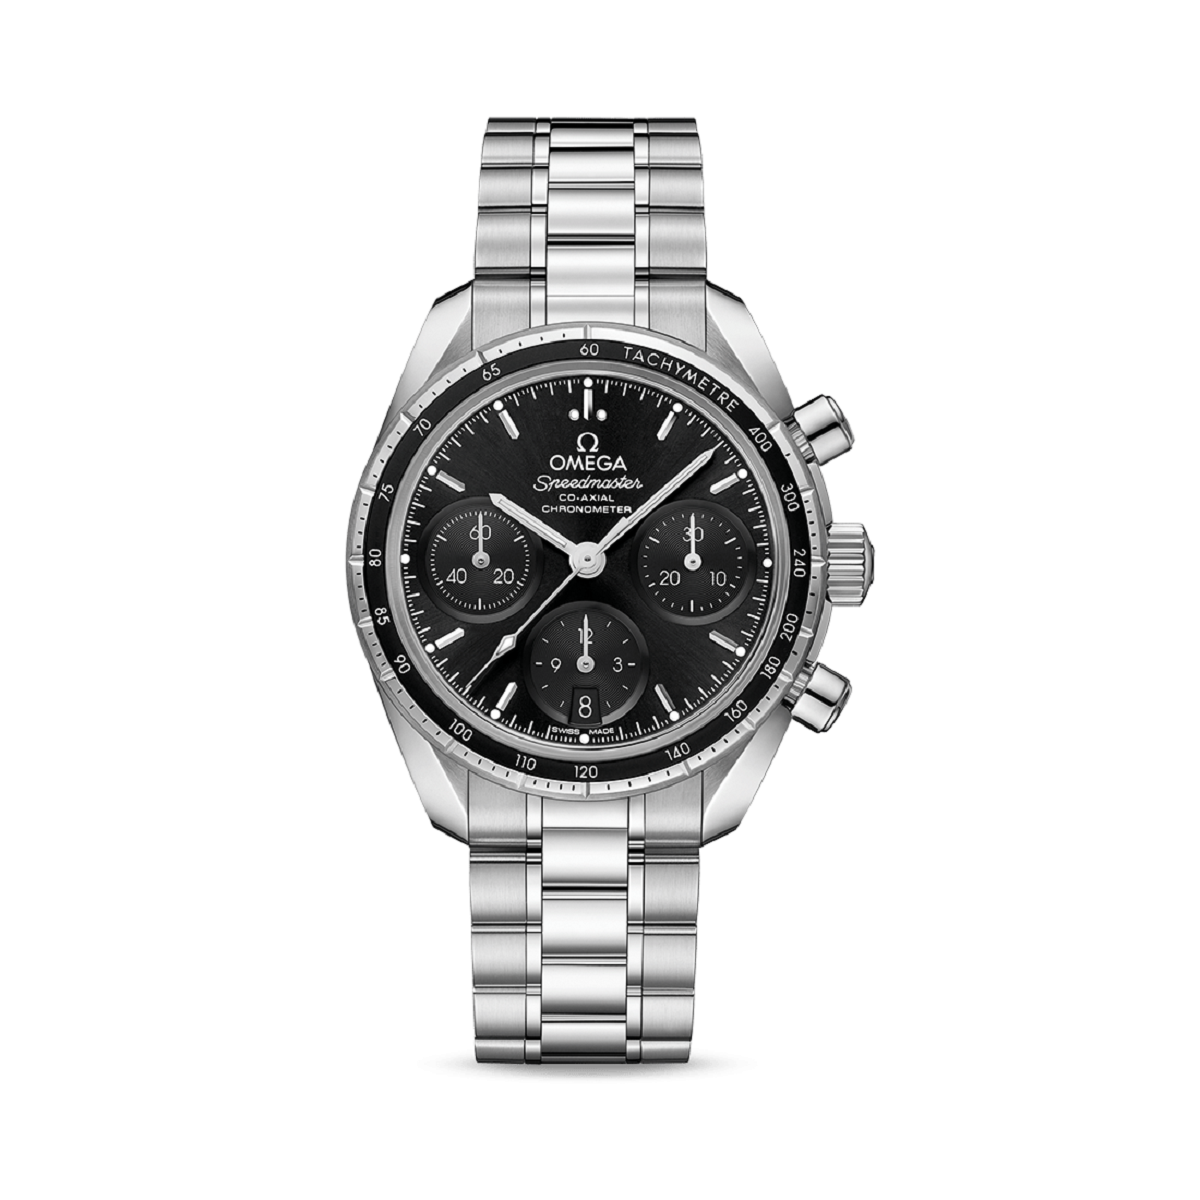 Omega Speedmaster 38MM Co-Axial Chronograph Automatic Watch - 324.30.38.50.01.001